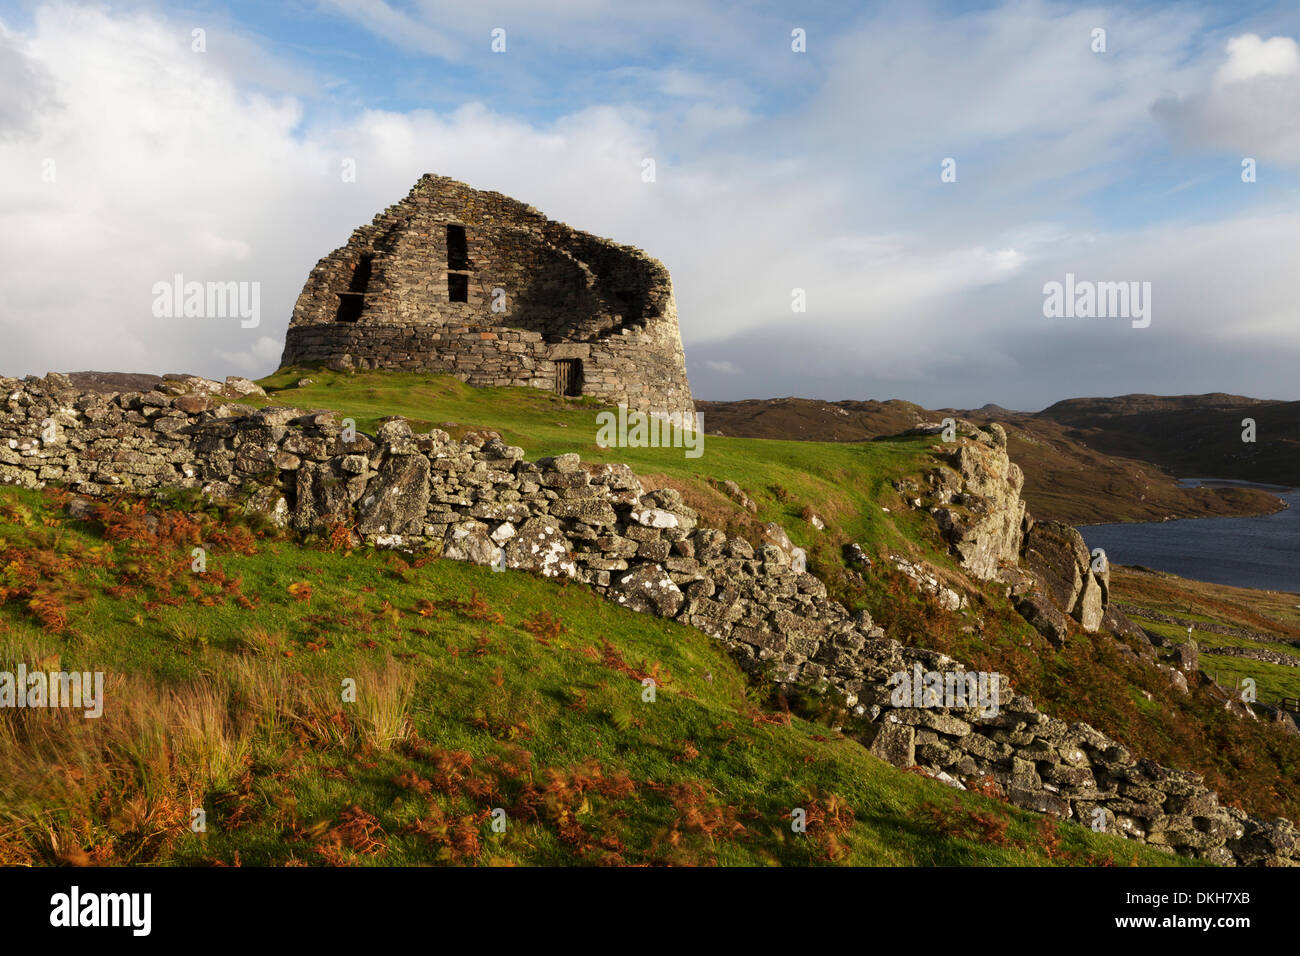 Evening light on Dun Carloway Broch, Isle of Lewis, Outer Hebrides, Scotland, United Kingdom, Europe Stock Photo